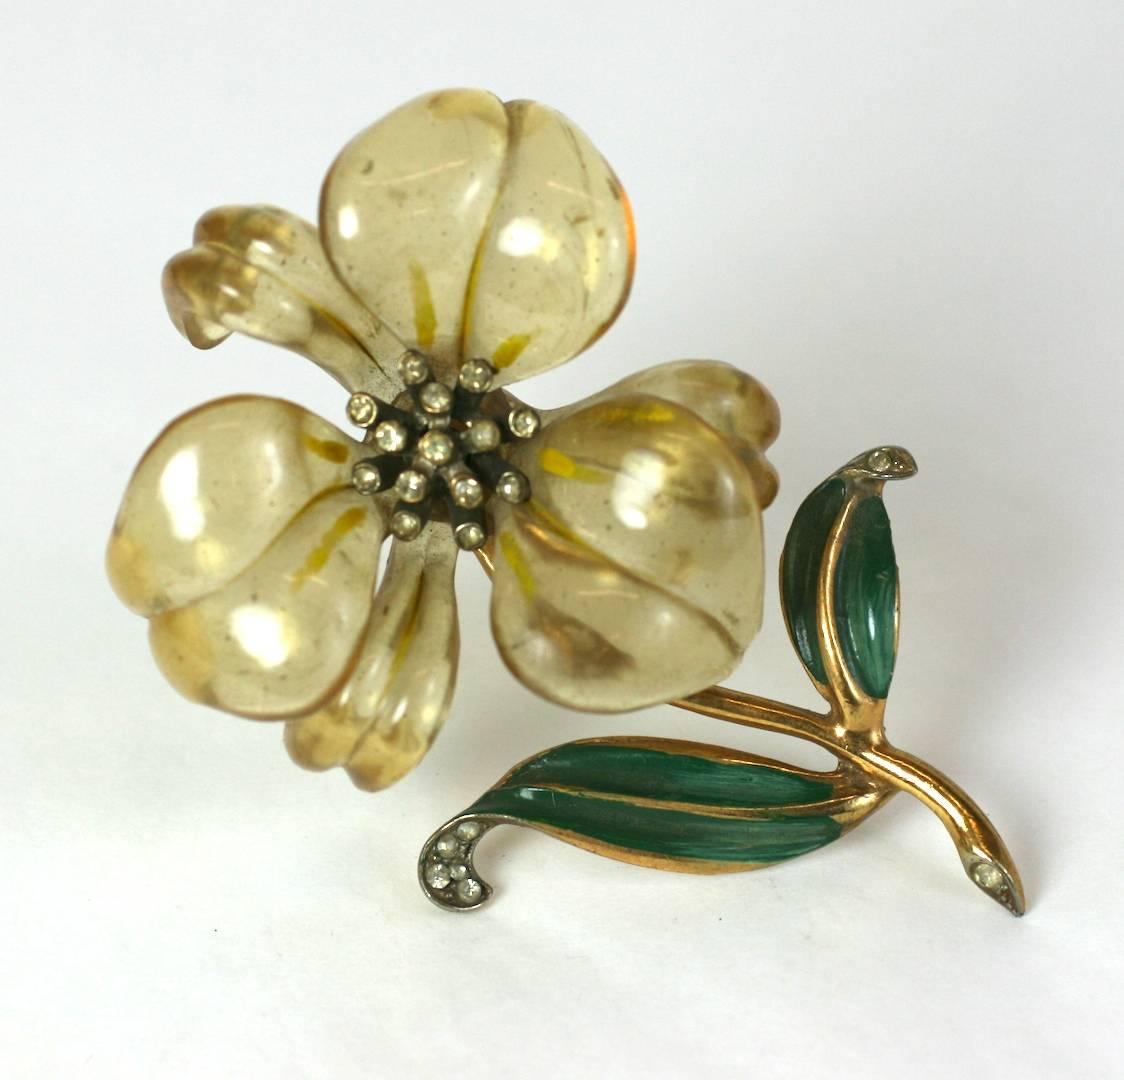 Wonderful Art Deco Lucite Lily Brooch from the 1930's. Massive lucite flower head is cold painted and mounted on an enameled white metal branch with pave rhinestone accents. Large scaled, charming figurative jewelry, popular in the 1930's.
Excellent